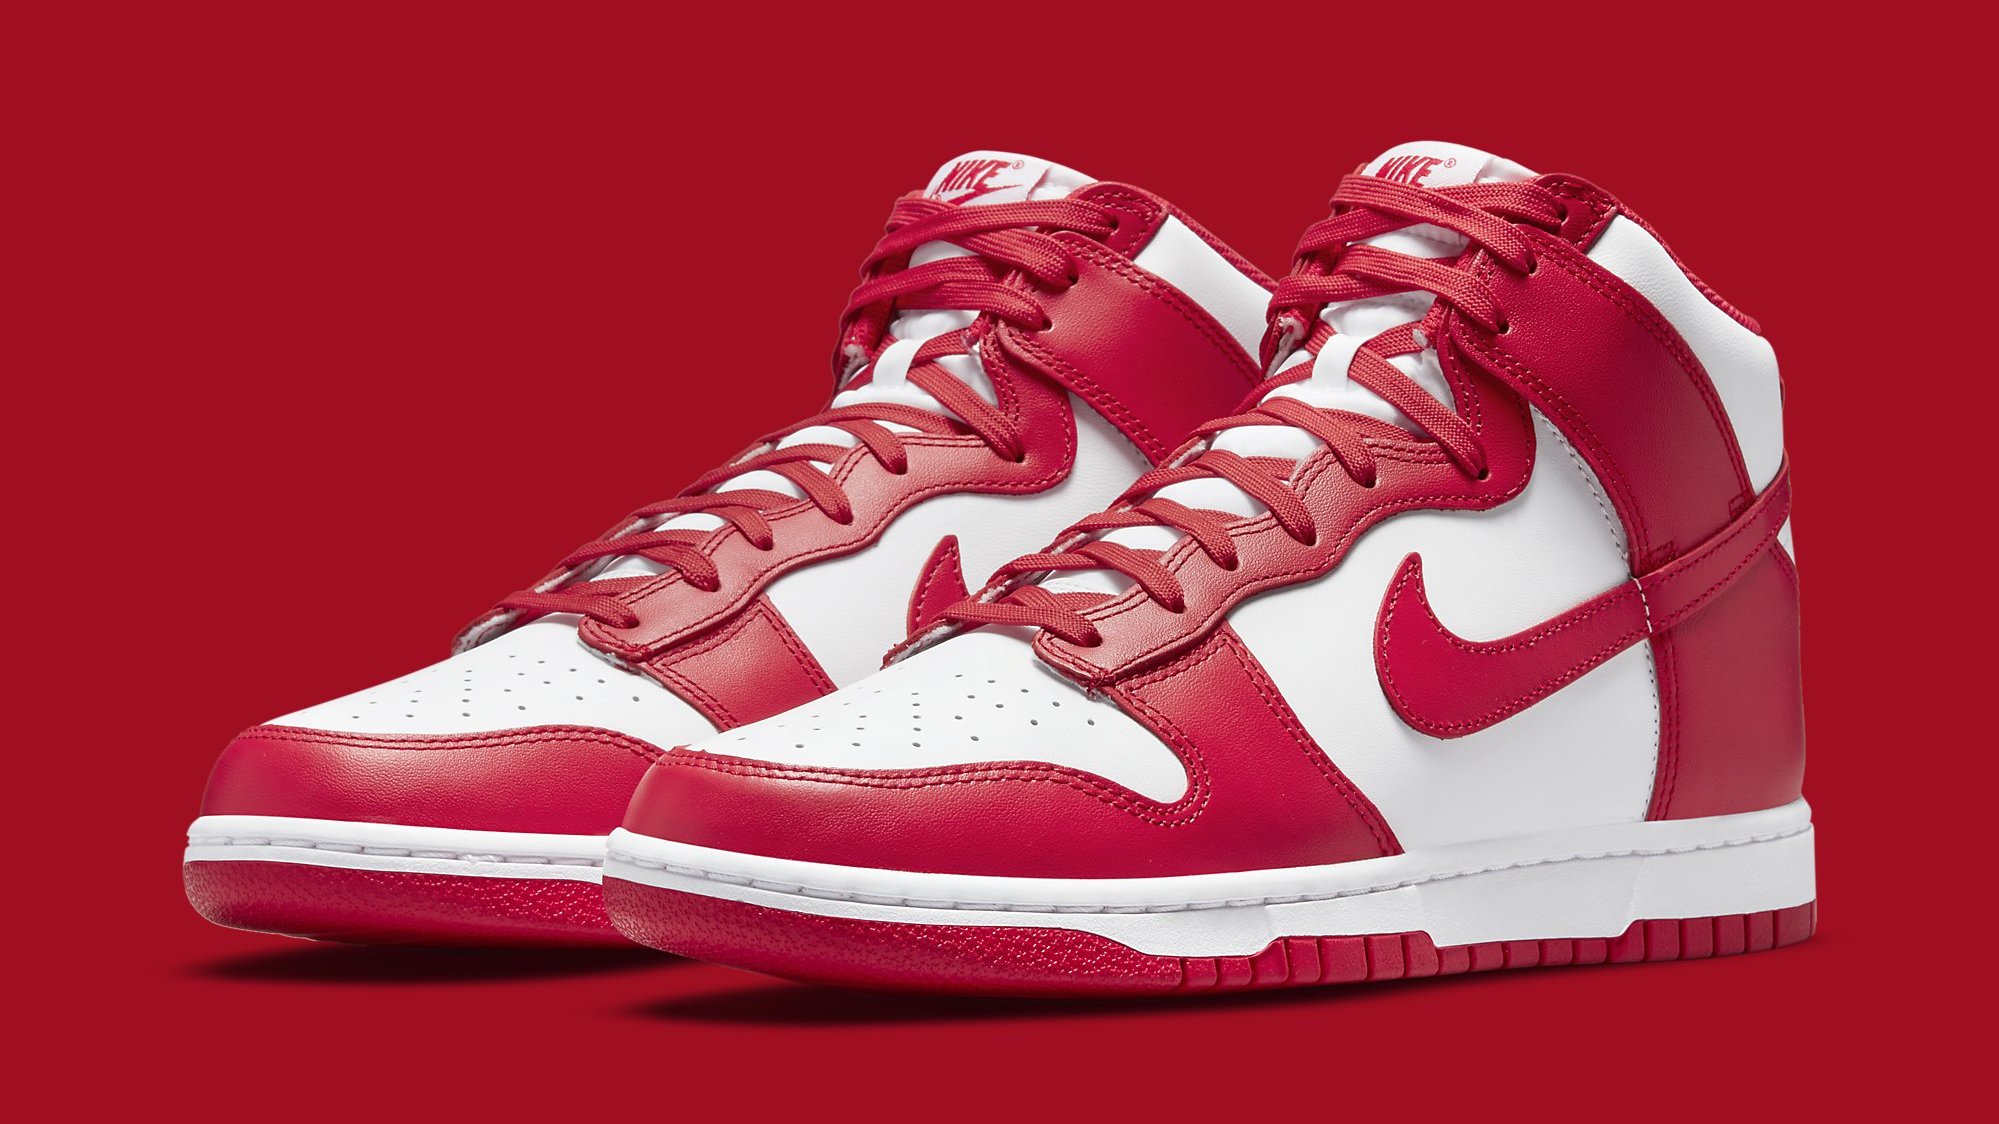 Championship Red' Nike Highs Get an Official Release | Complex